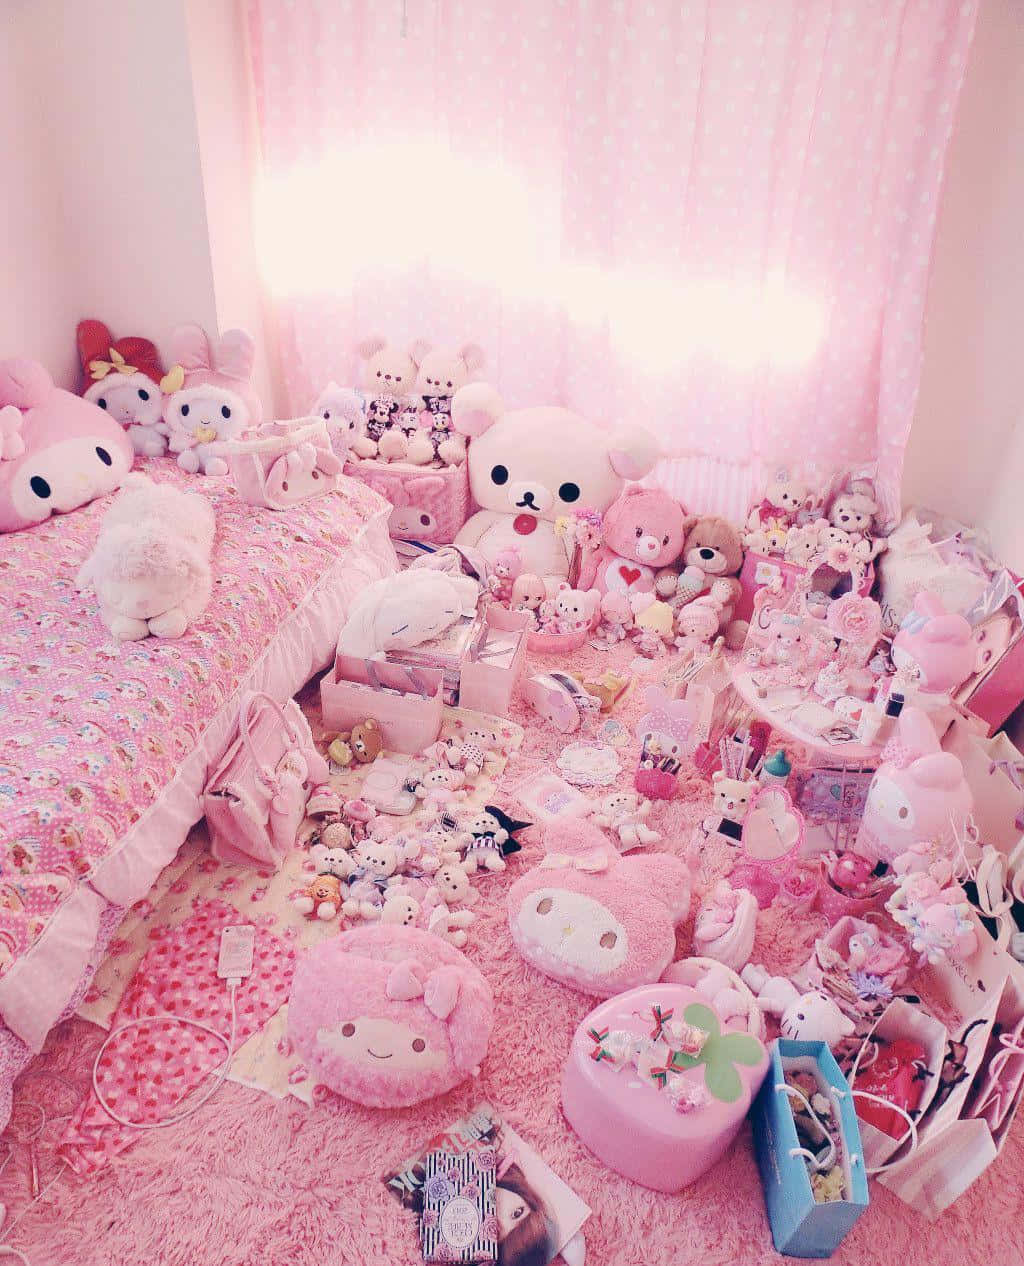 A cozy and enchanting Kawaii-themed room with adorable pastel decorations and plushies. Wallpaper